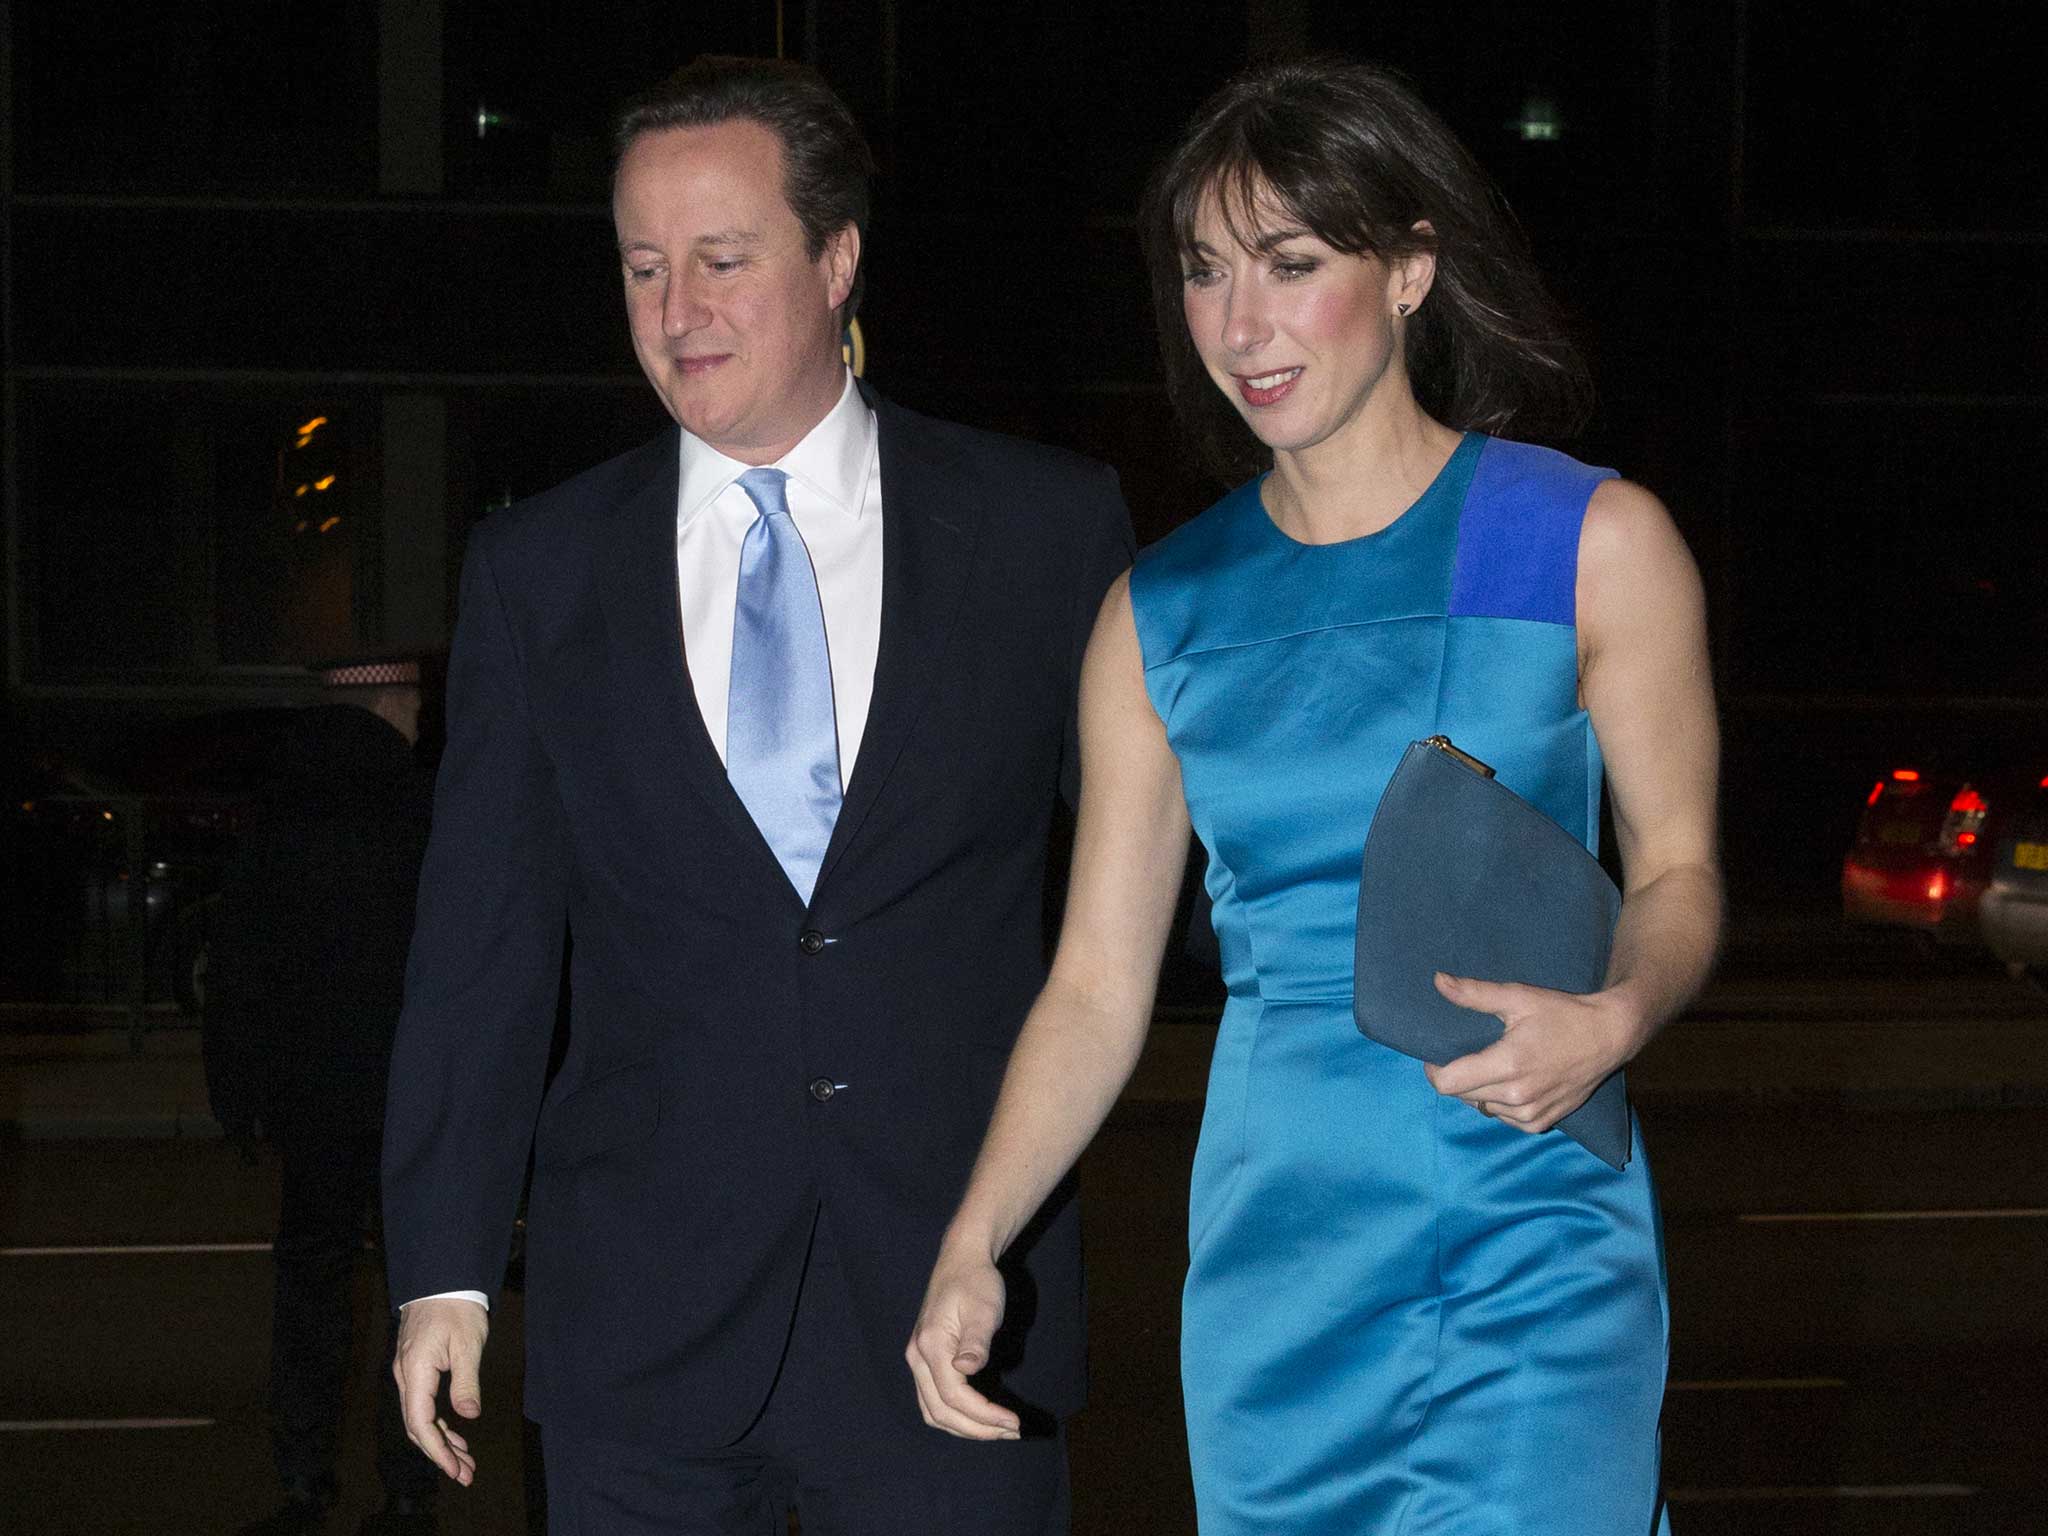 David and Samantha Cameron arrive for the COnservative Party fundraiser